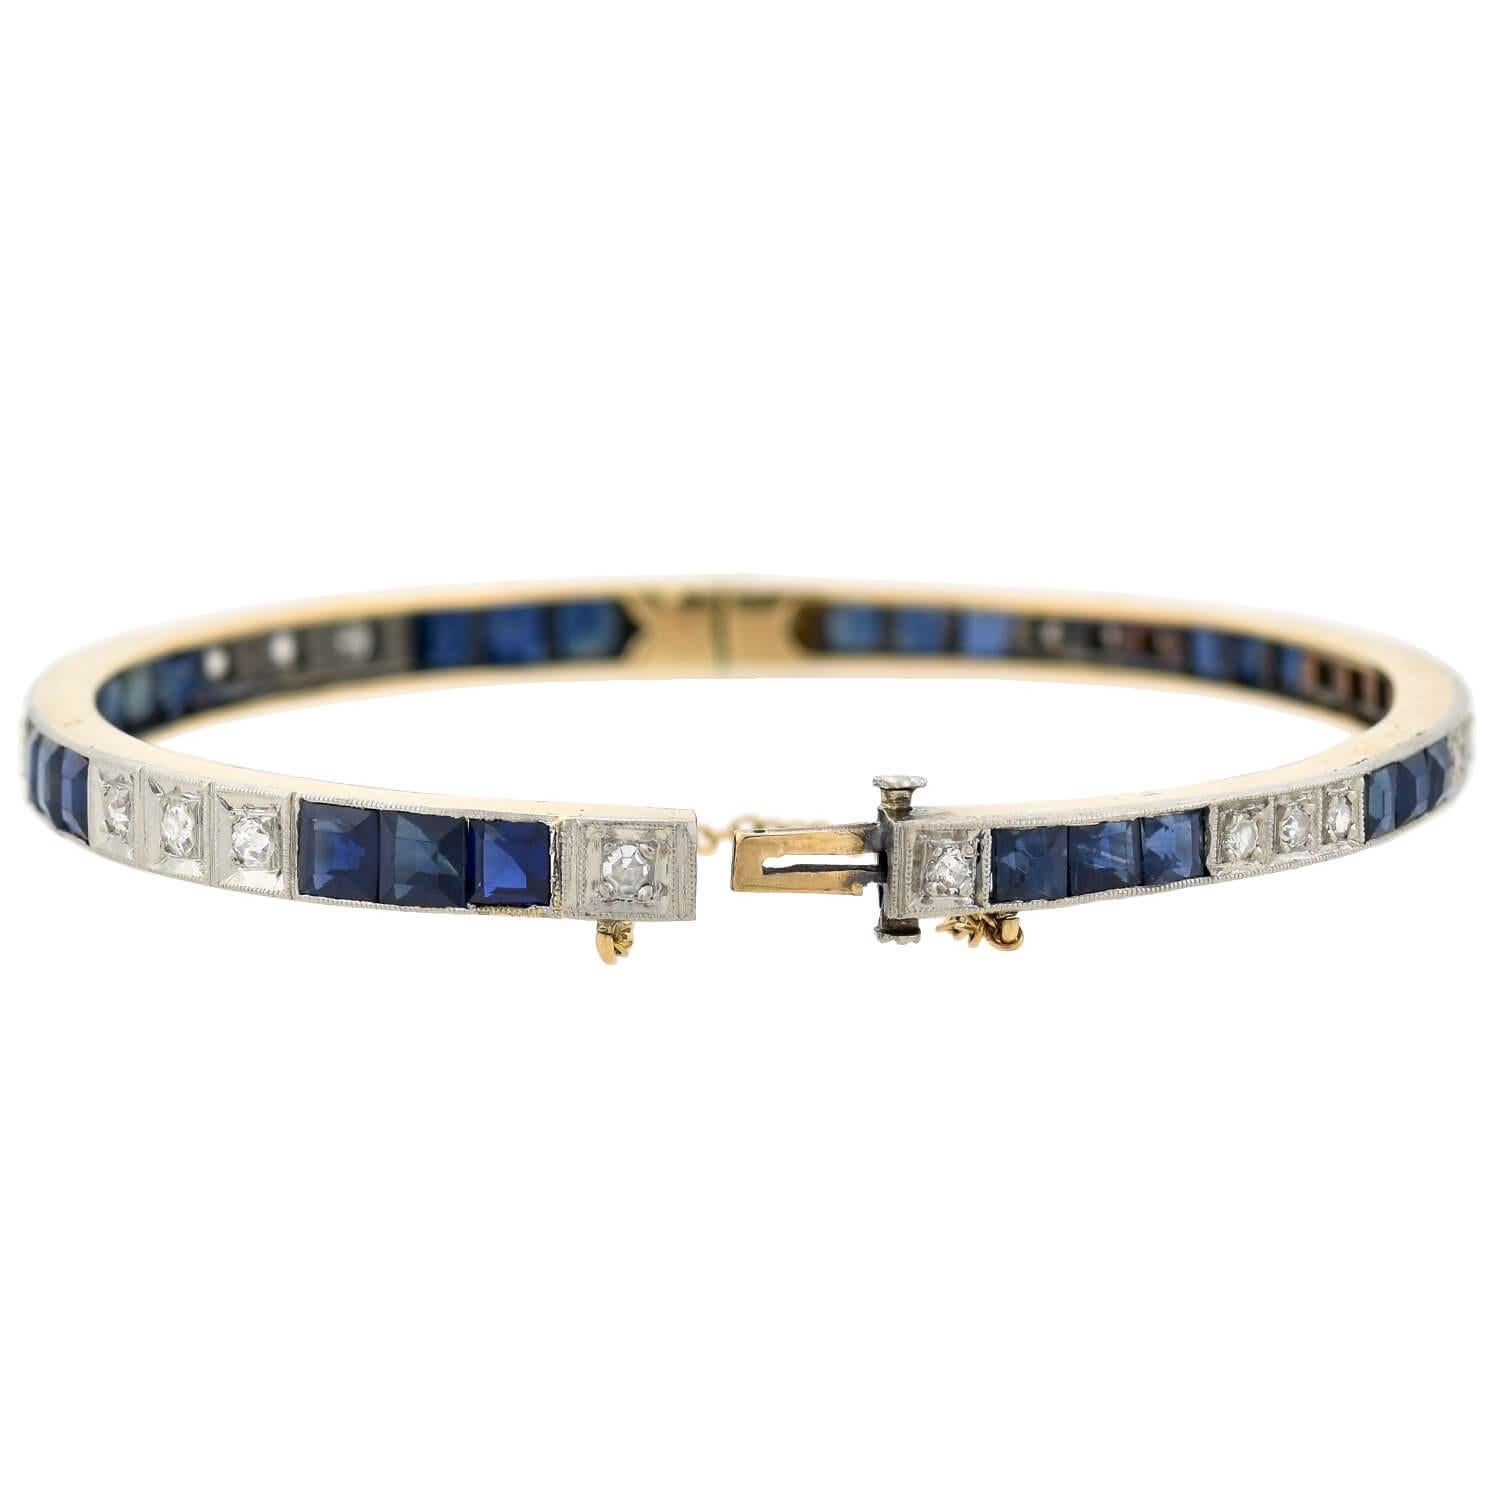 A beautiful sapphire and diamond bracelet from the Edwardian (ca1910s) era! Crafted in 14kt gold, the bangle-style bracelet is topped in platinum for a lovely 2-tone effect. Lining the bracelet's surface are a mix of 9 old Mine Cut diamonds on one